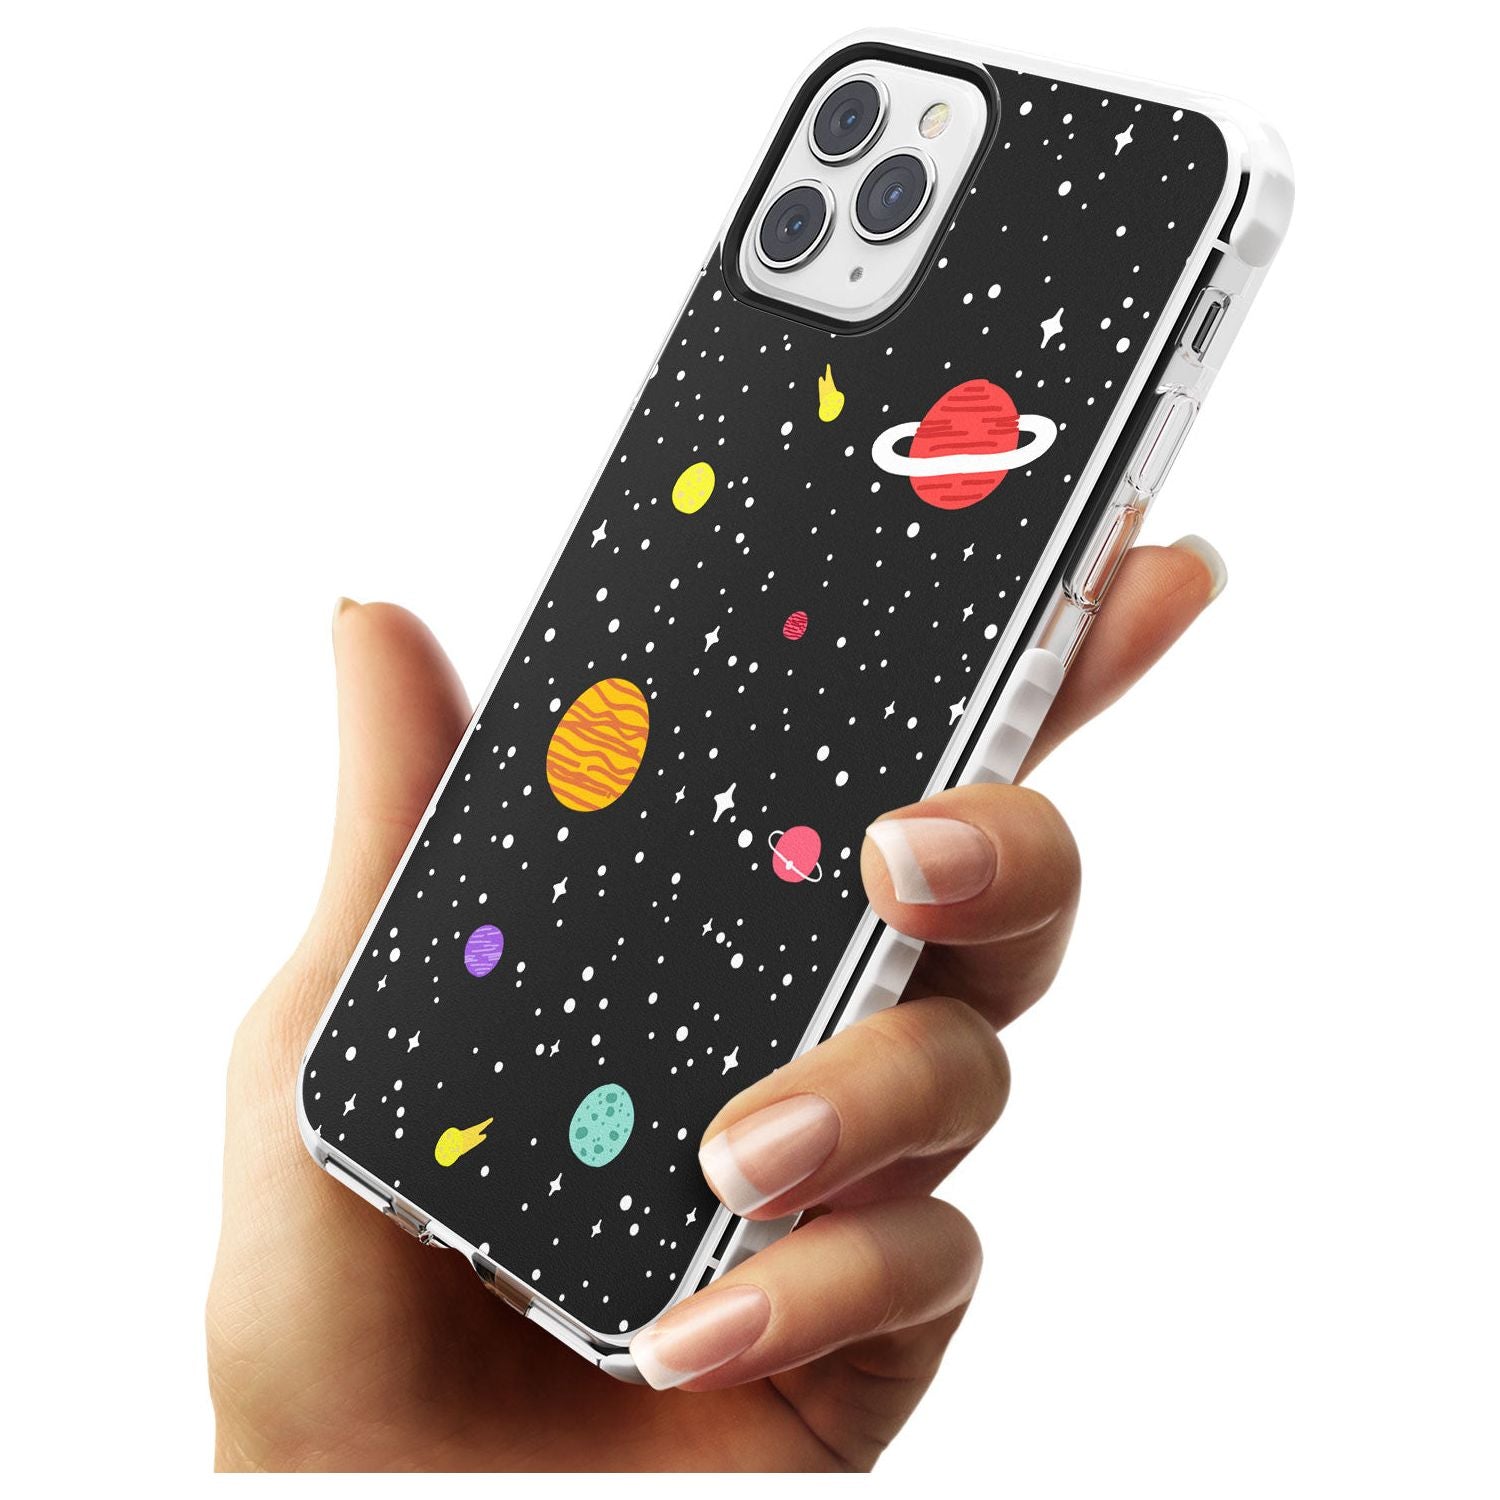 Cute Cartoon Planets Impact Phone Case for iPhone 11 Pro Max